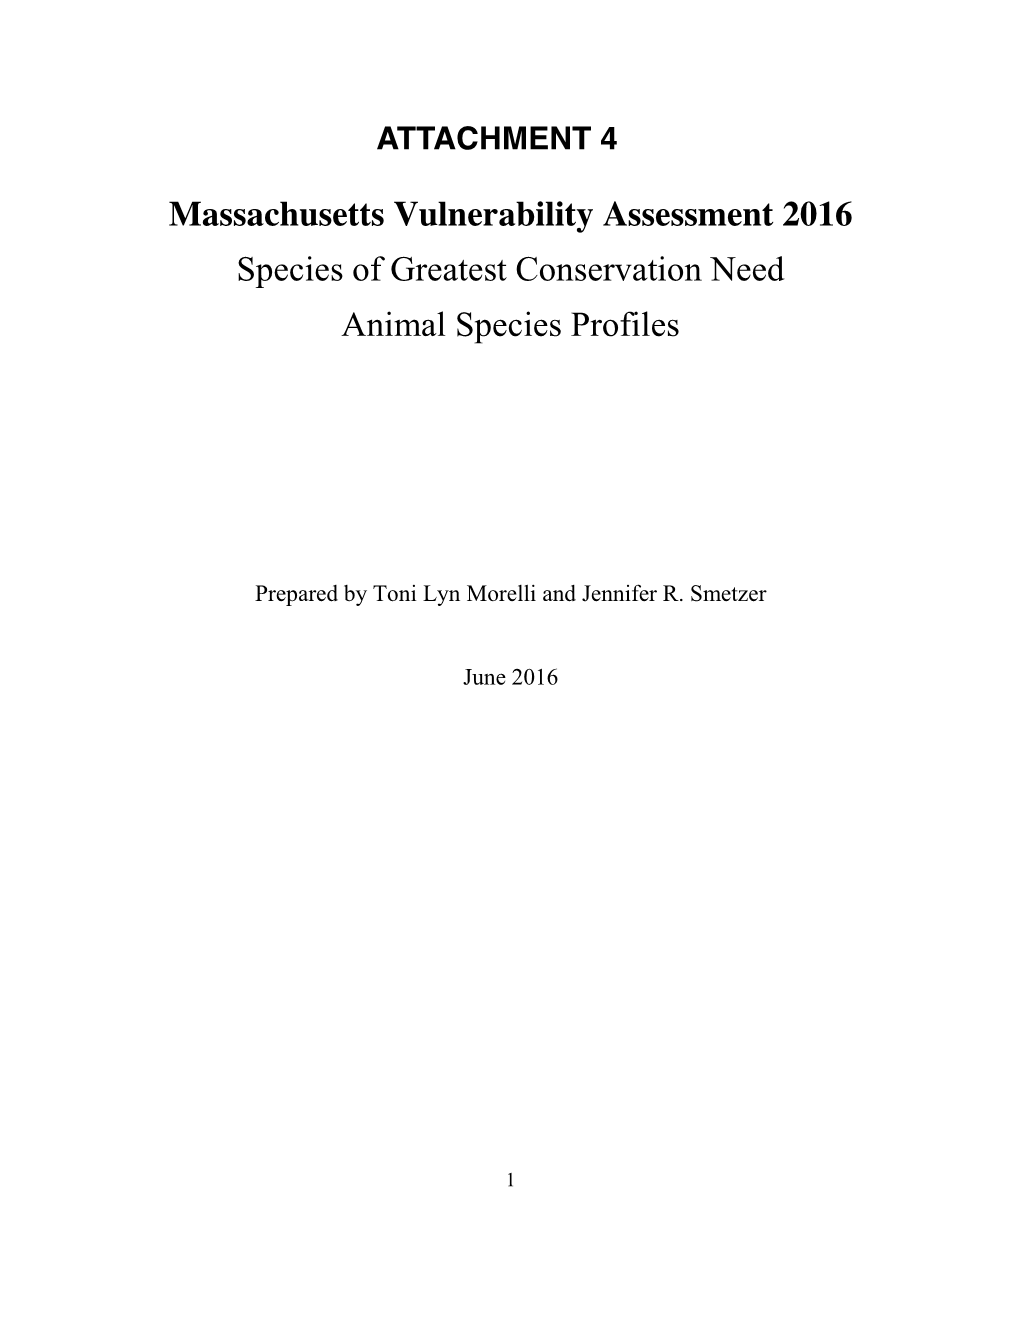 Massachusetts Vulnerability Assessment 2016 Species of Greatest Conservation Need Animal Species Profiles